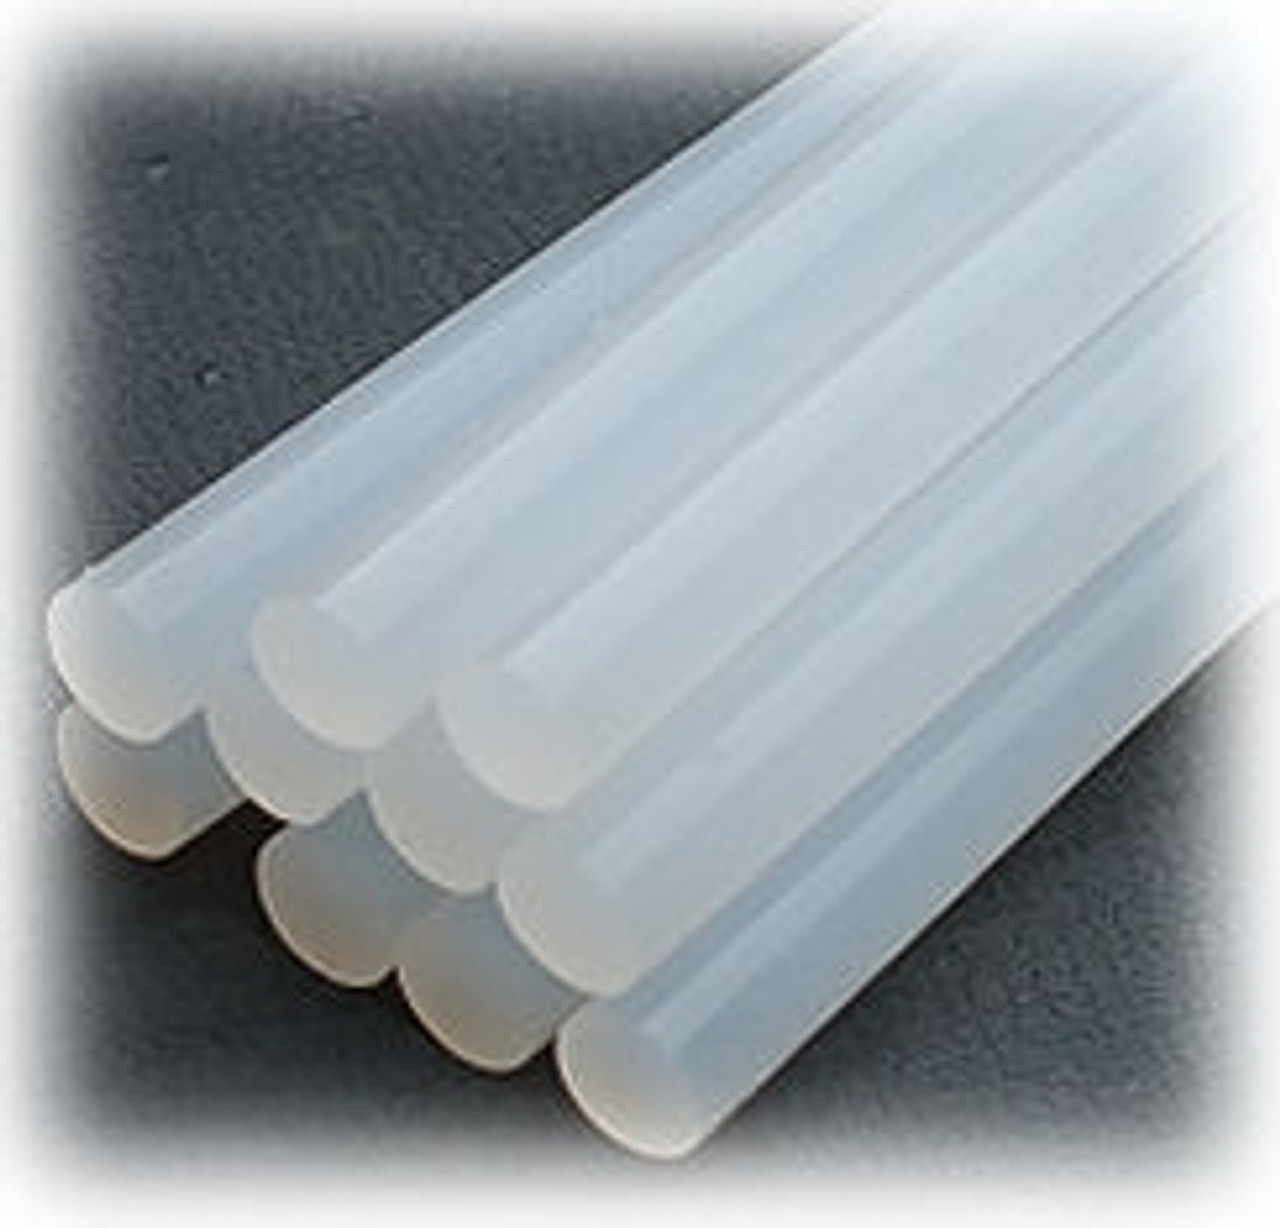 Small Glue Sticks for Crafts and Sewing